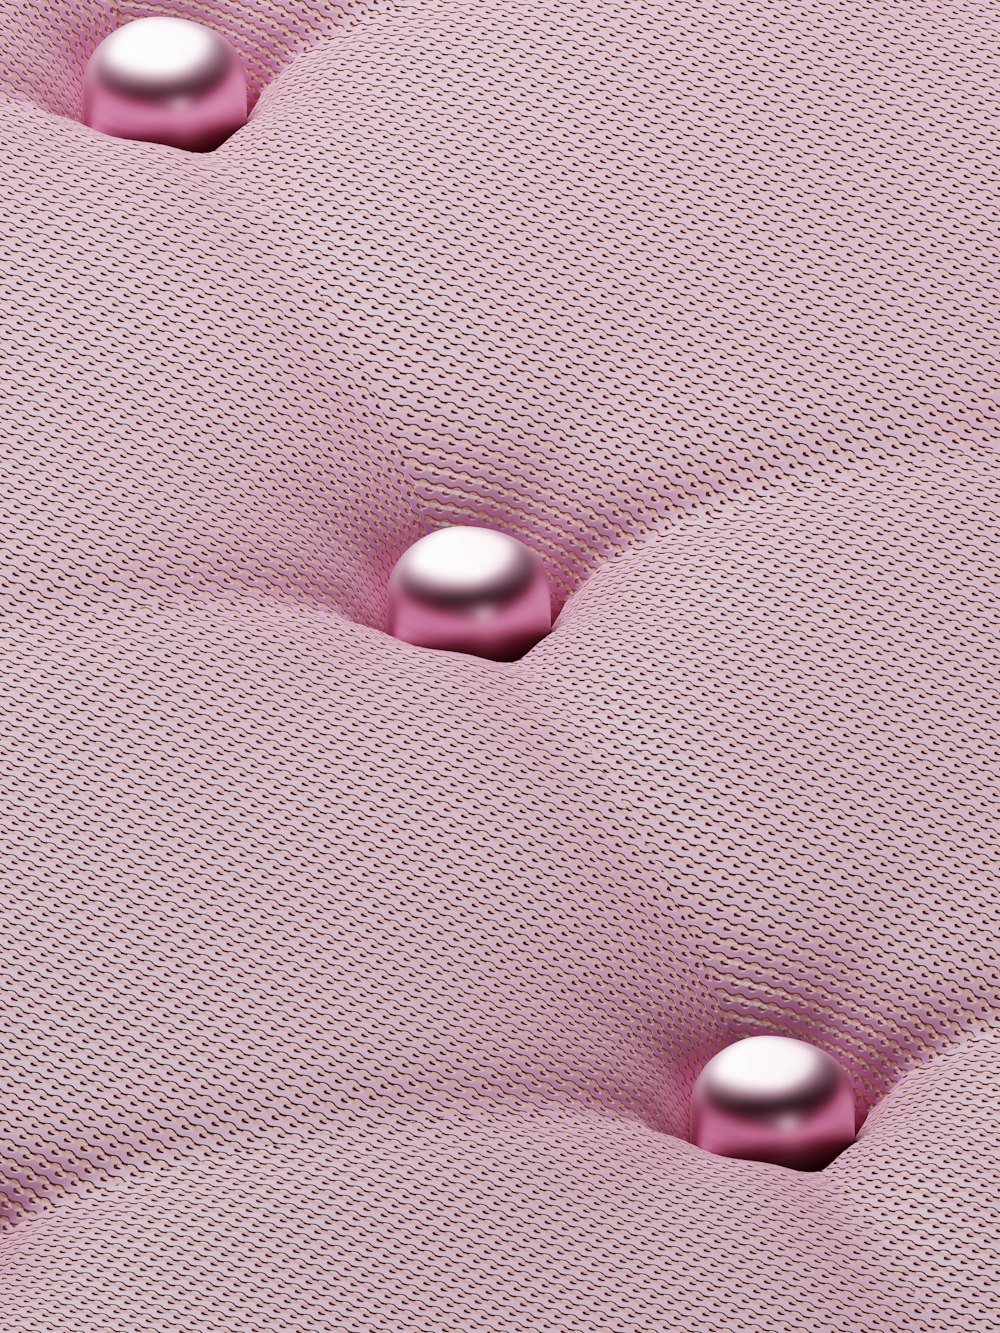 a close up of a pink upholstered material